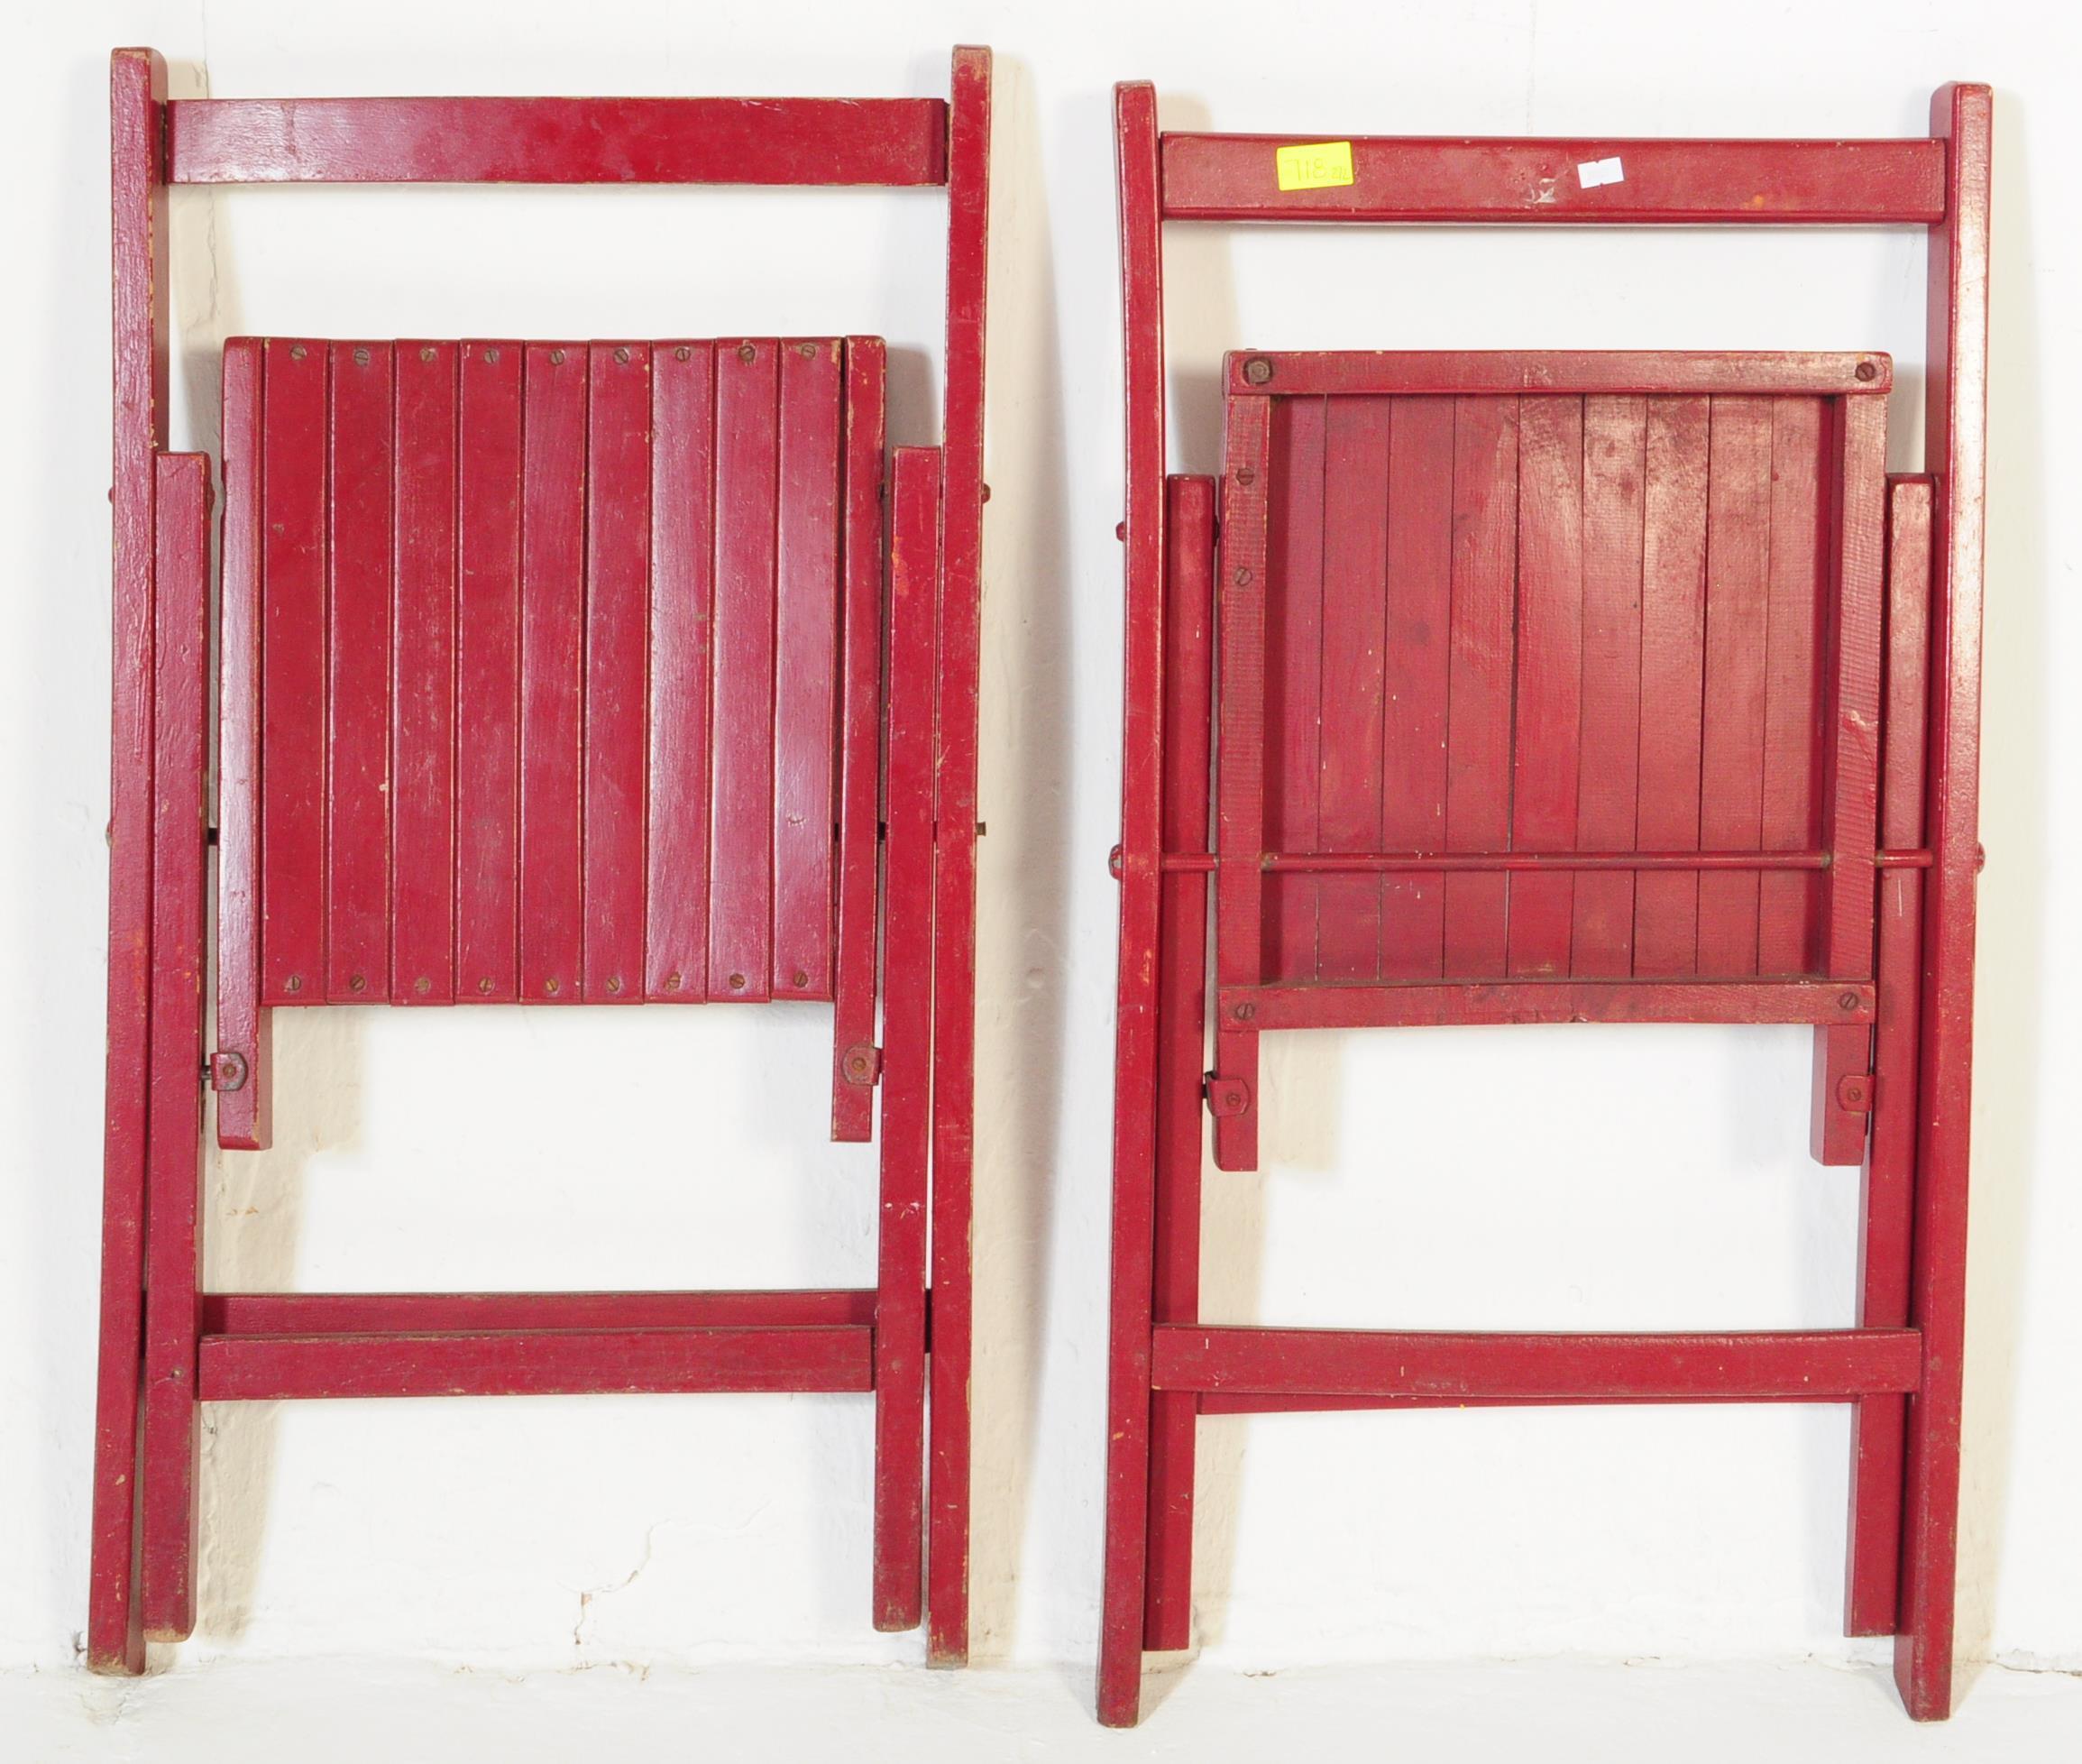 A PAIR OF 20TH CENTURY FOLDING DINING CHAIRS IN RED - Image 5 of 5